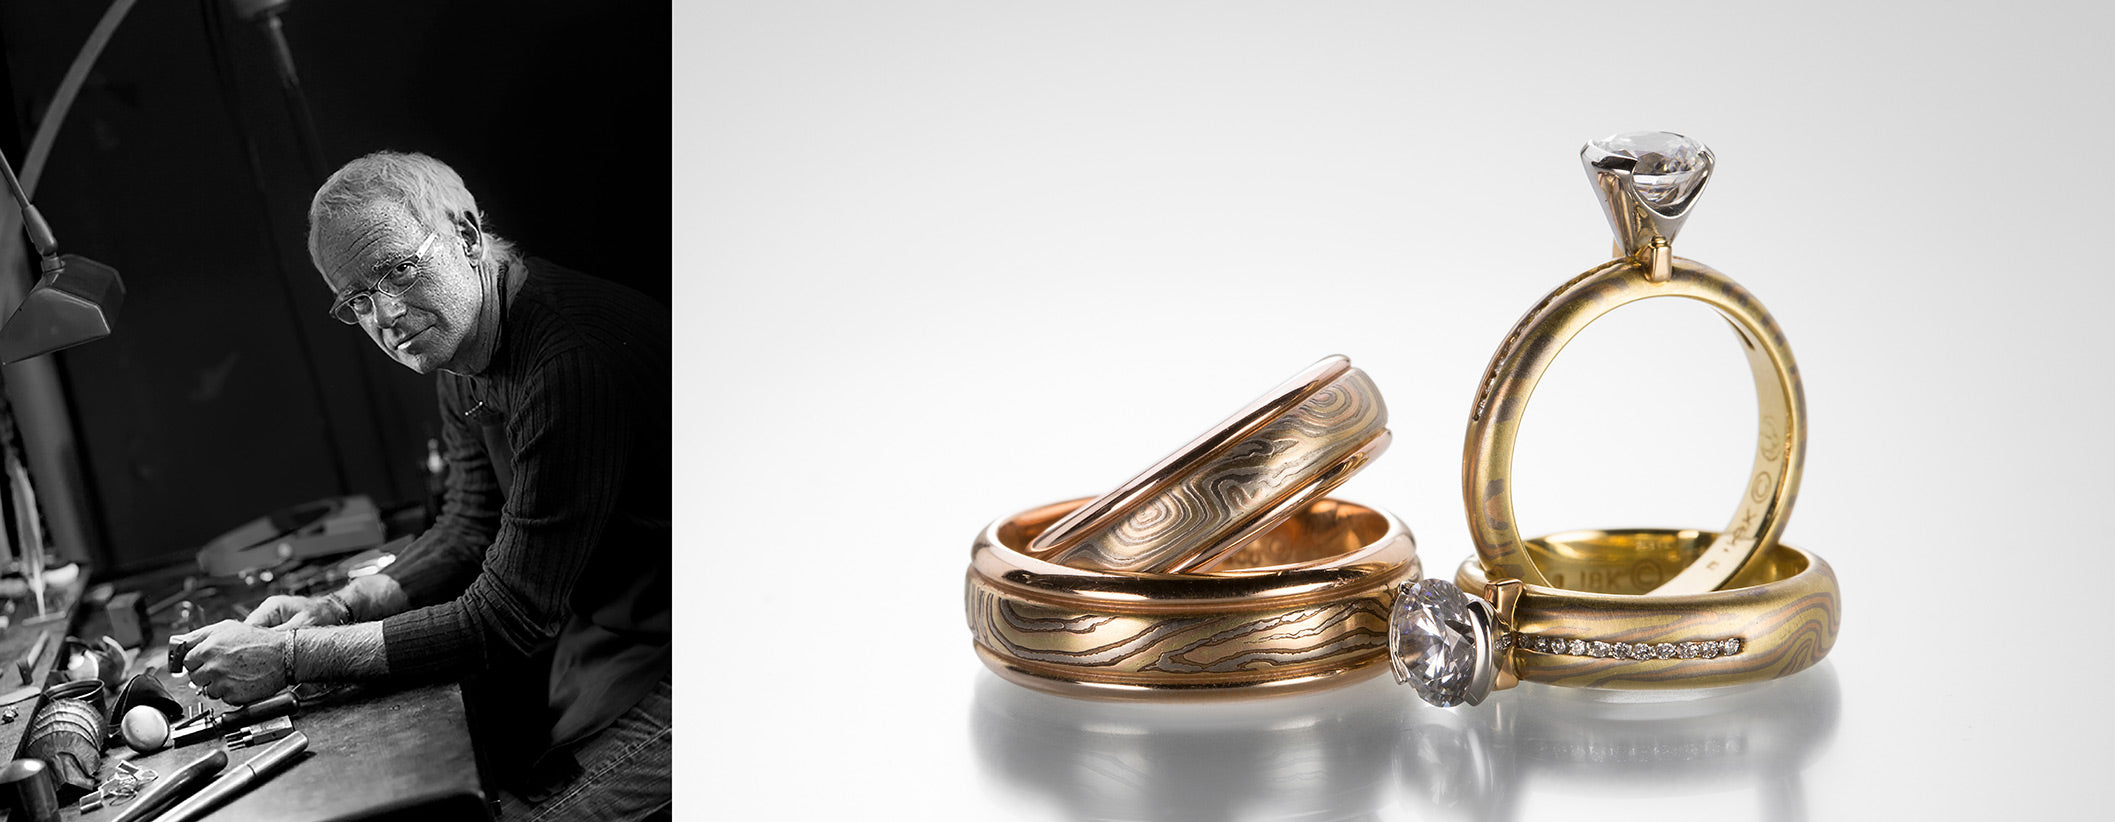 George Sawyer | Designer Jewelry | Shop George Sawyer jewelry at Quadrum, located in the Greater Boston Area, featuring a collection of women and men's mokume gane wedding bands and mokume gane engagement rings.